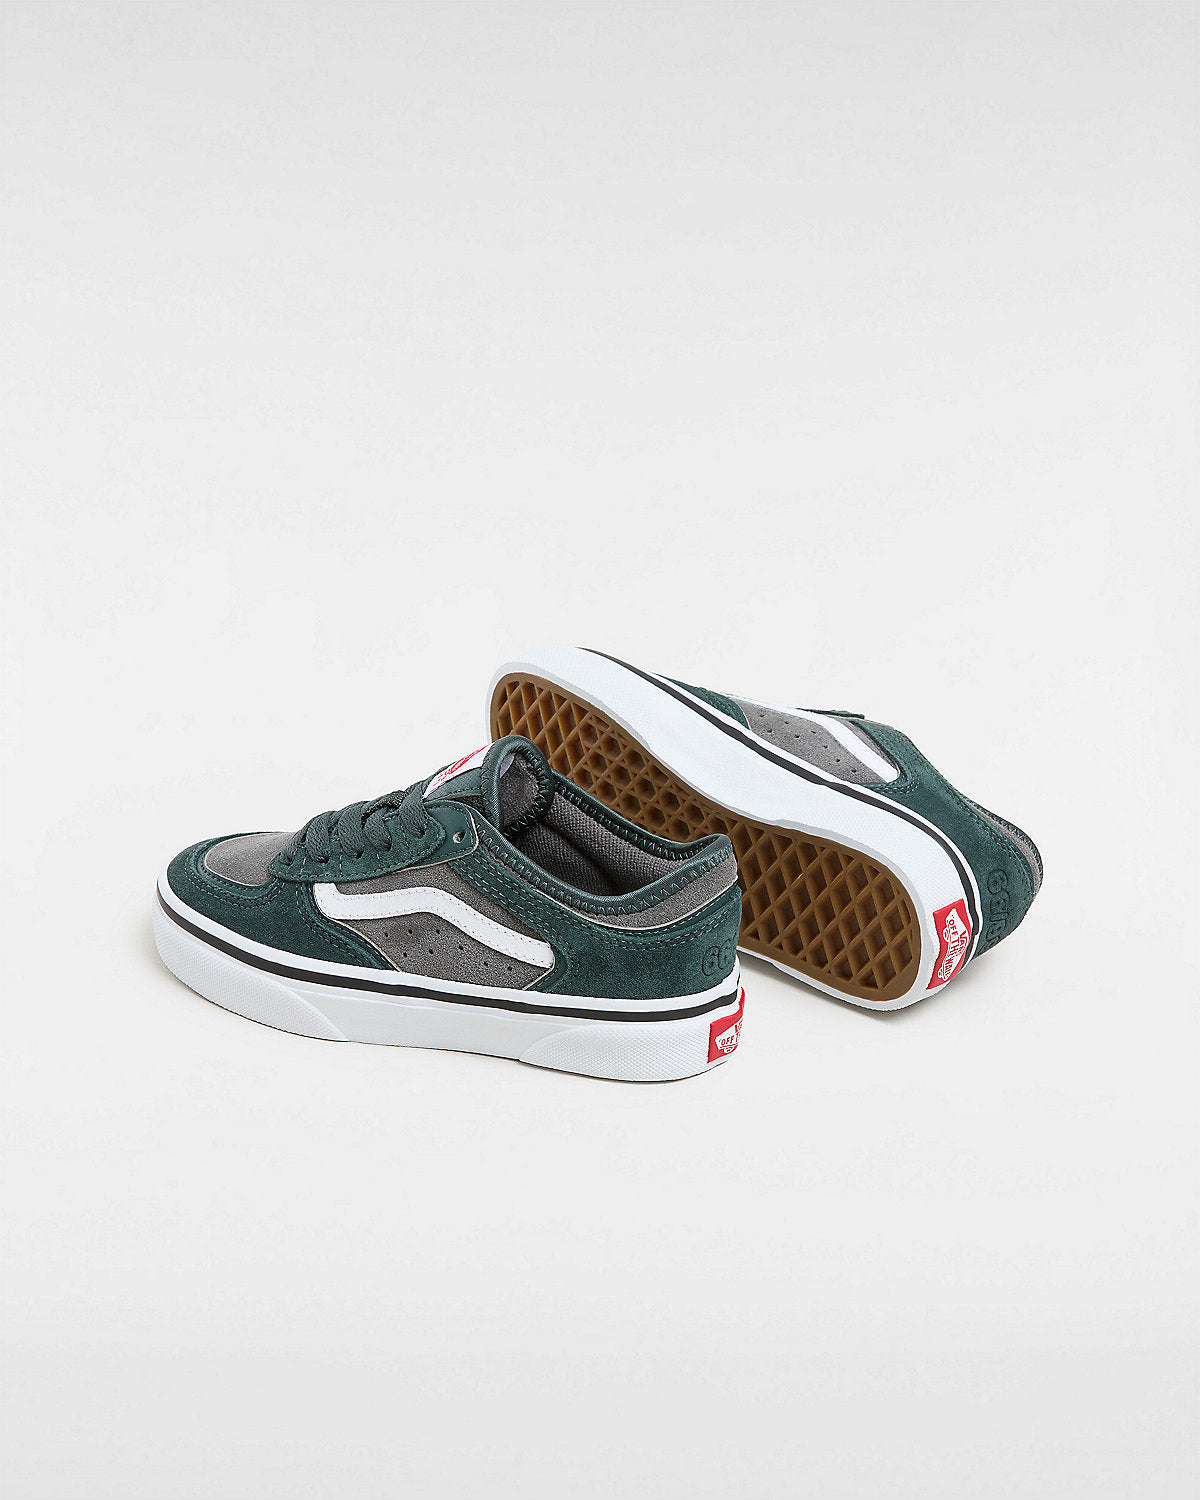 VANS Kids Rowley Trainers - Green Gables / White